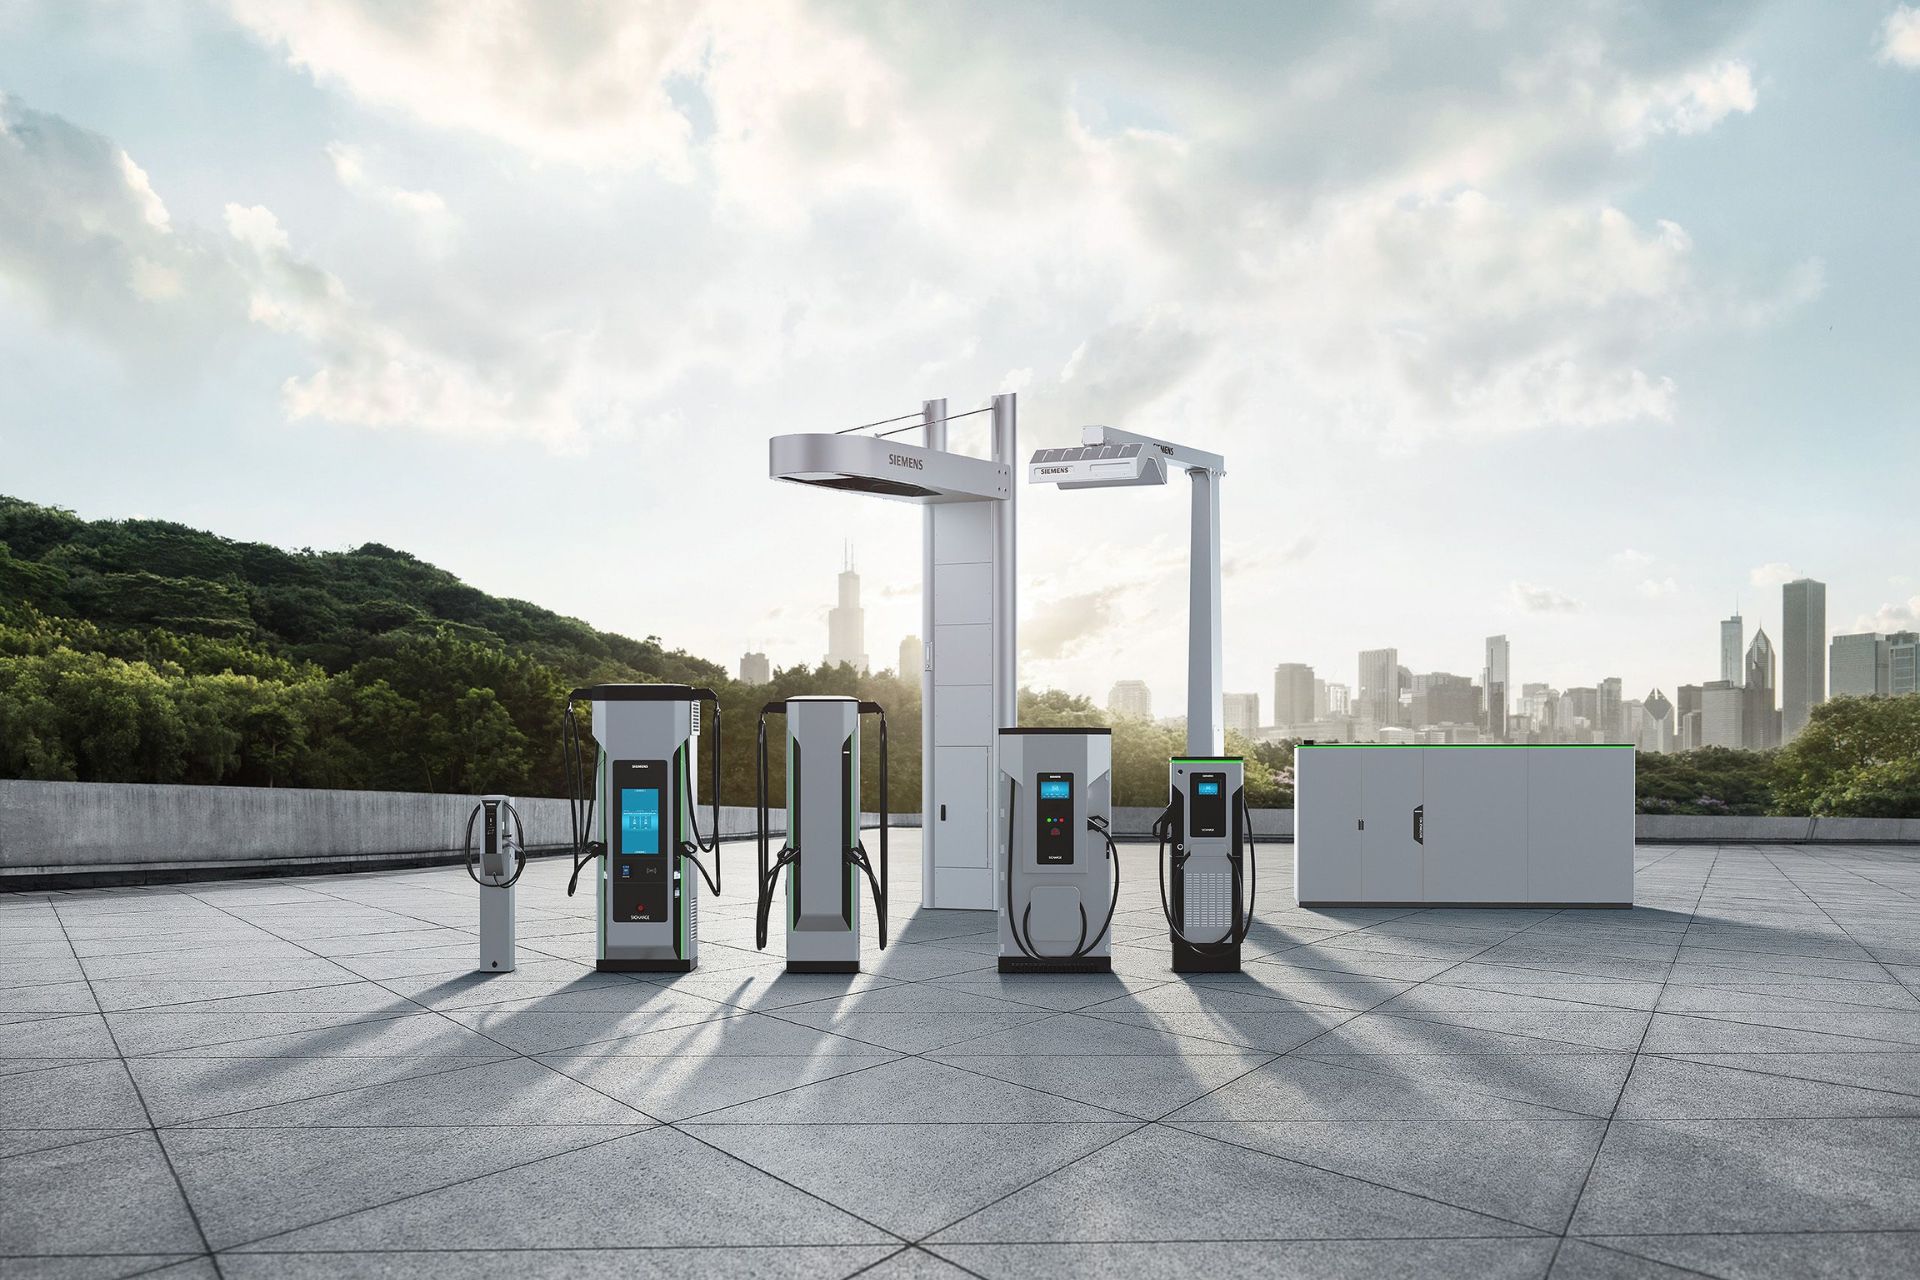 Recharging your electric car in 15 minutes is possible with these new terminals